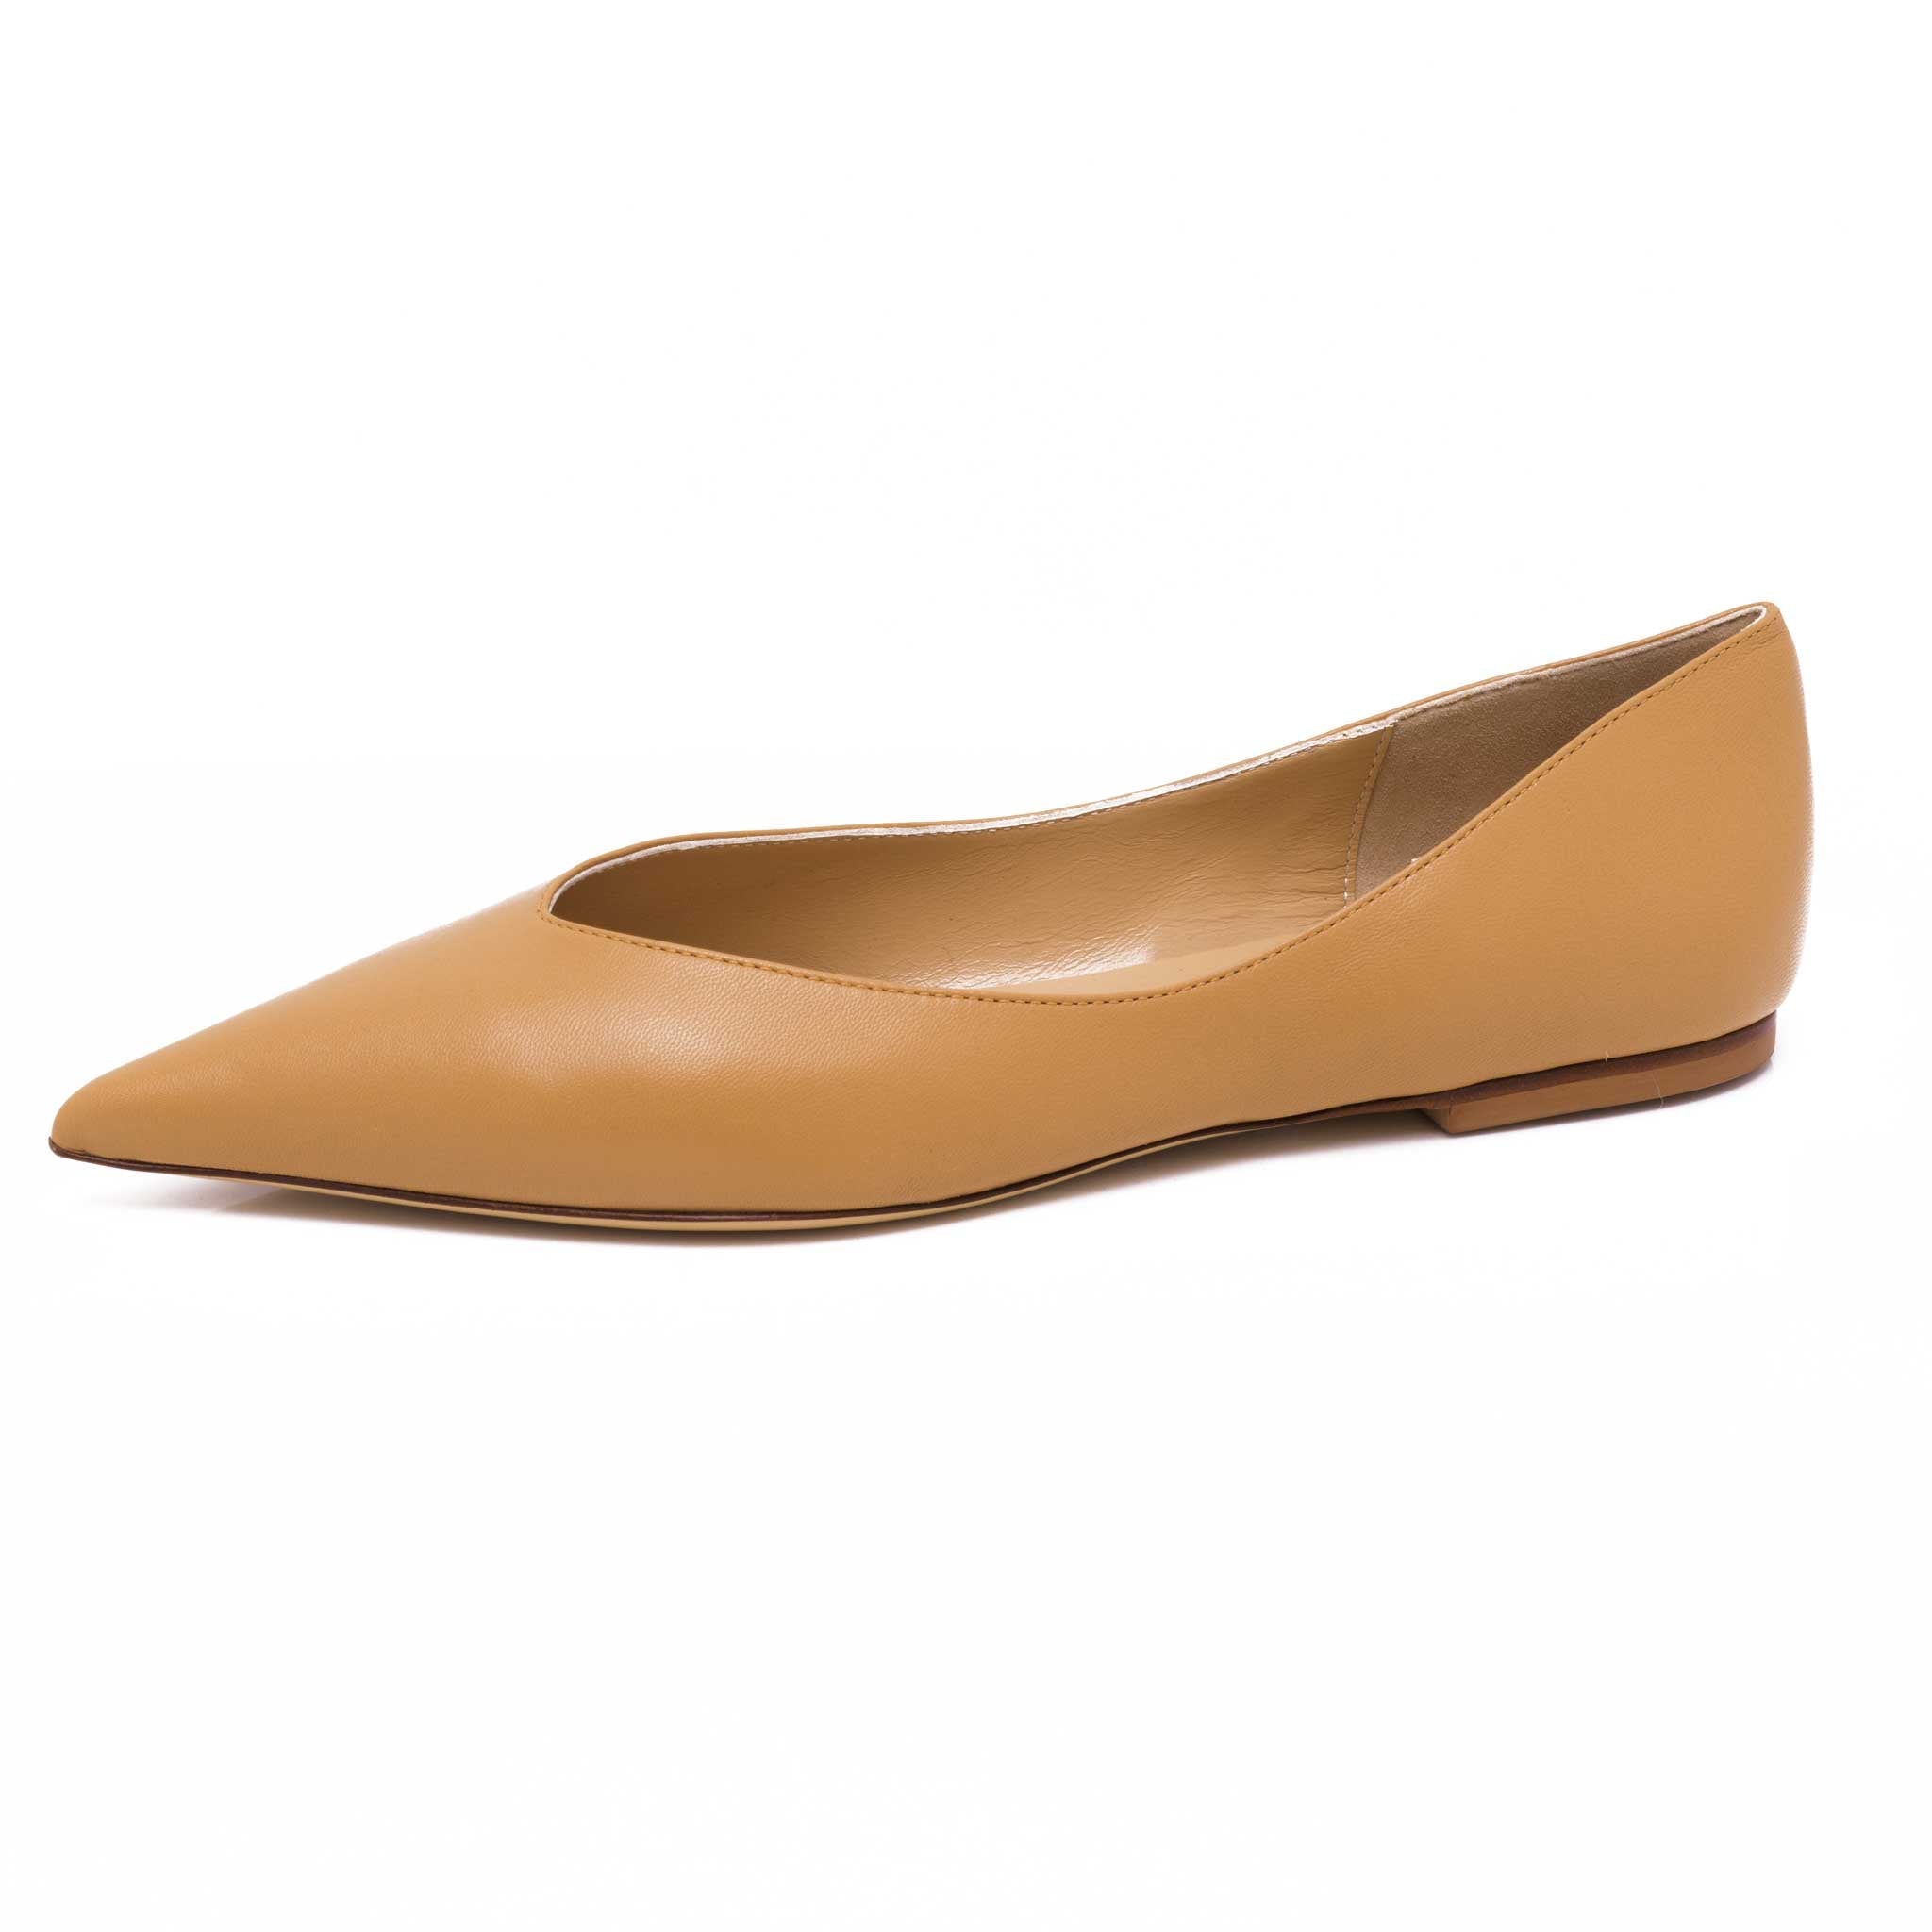 pointy flat slip on shoes in camel leather color luxury fashion footwear